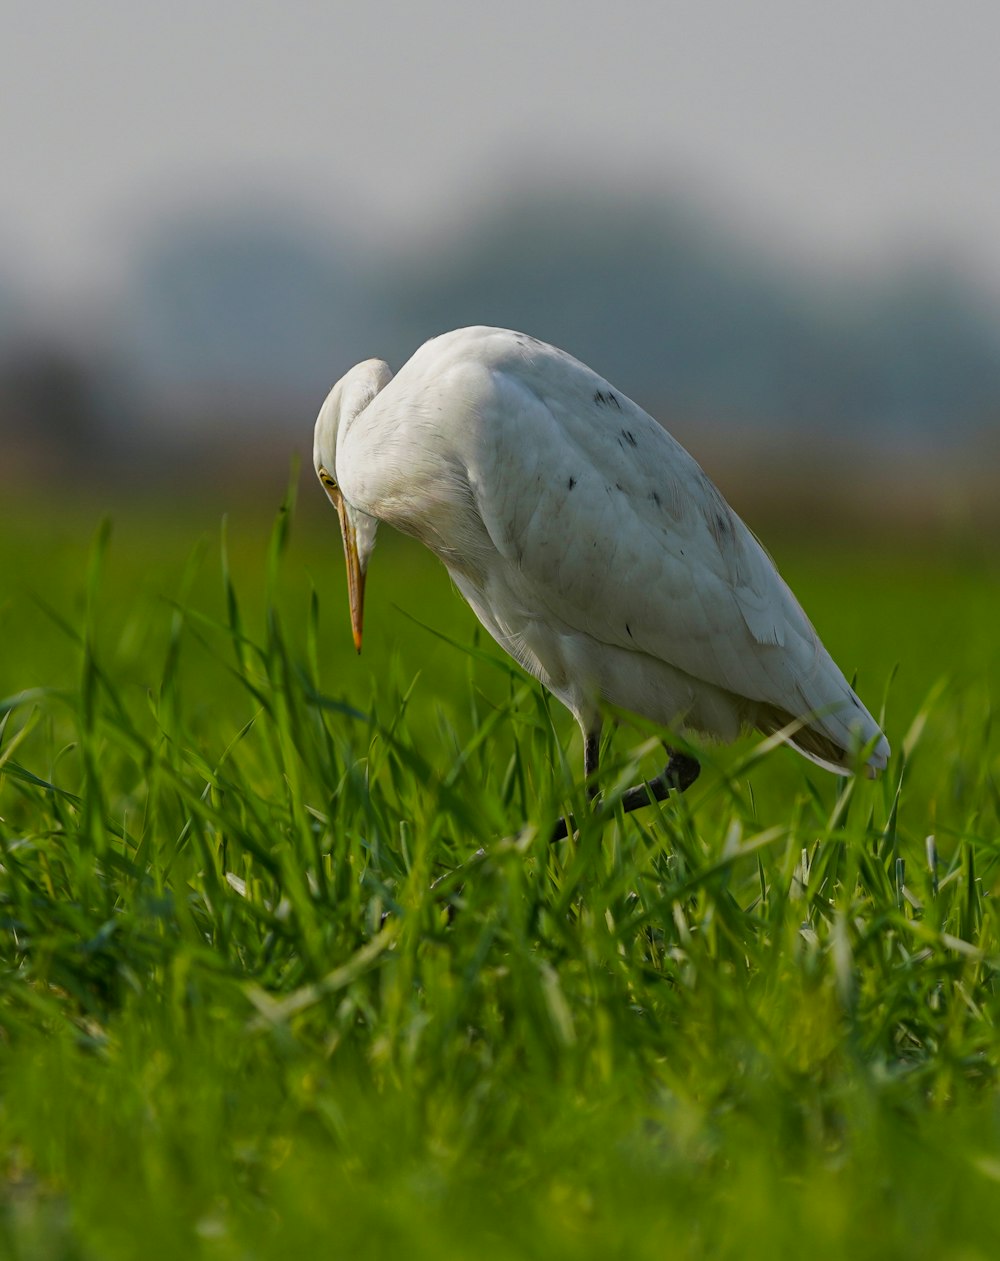 a white bird with a long beak standing in the grass